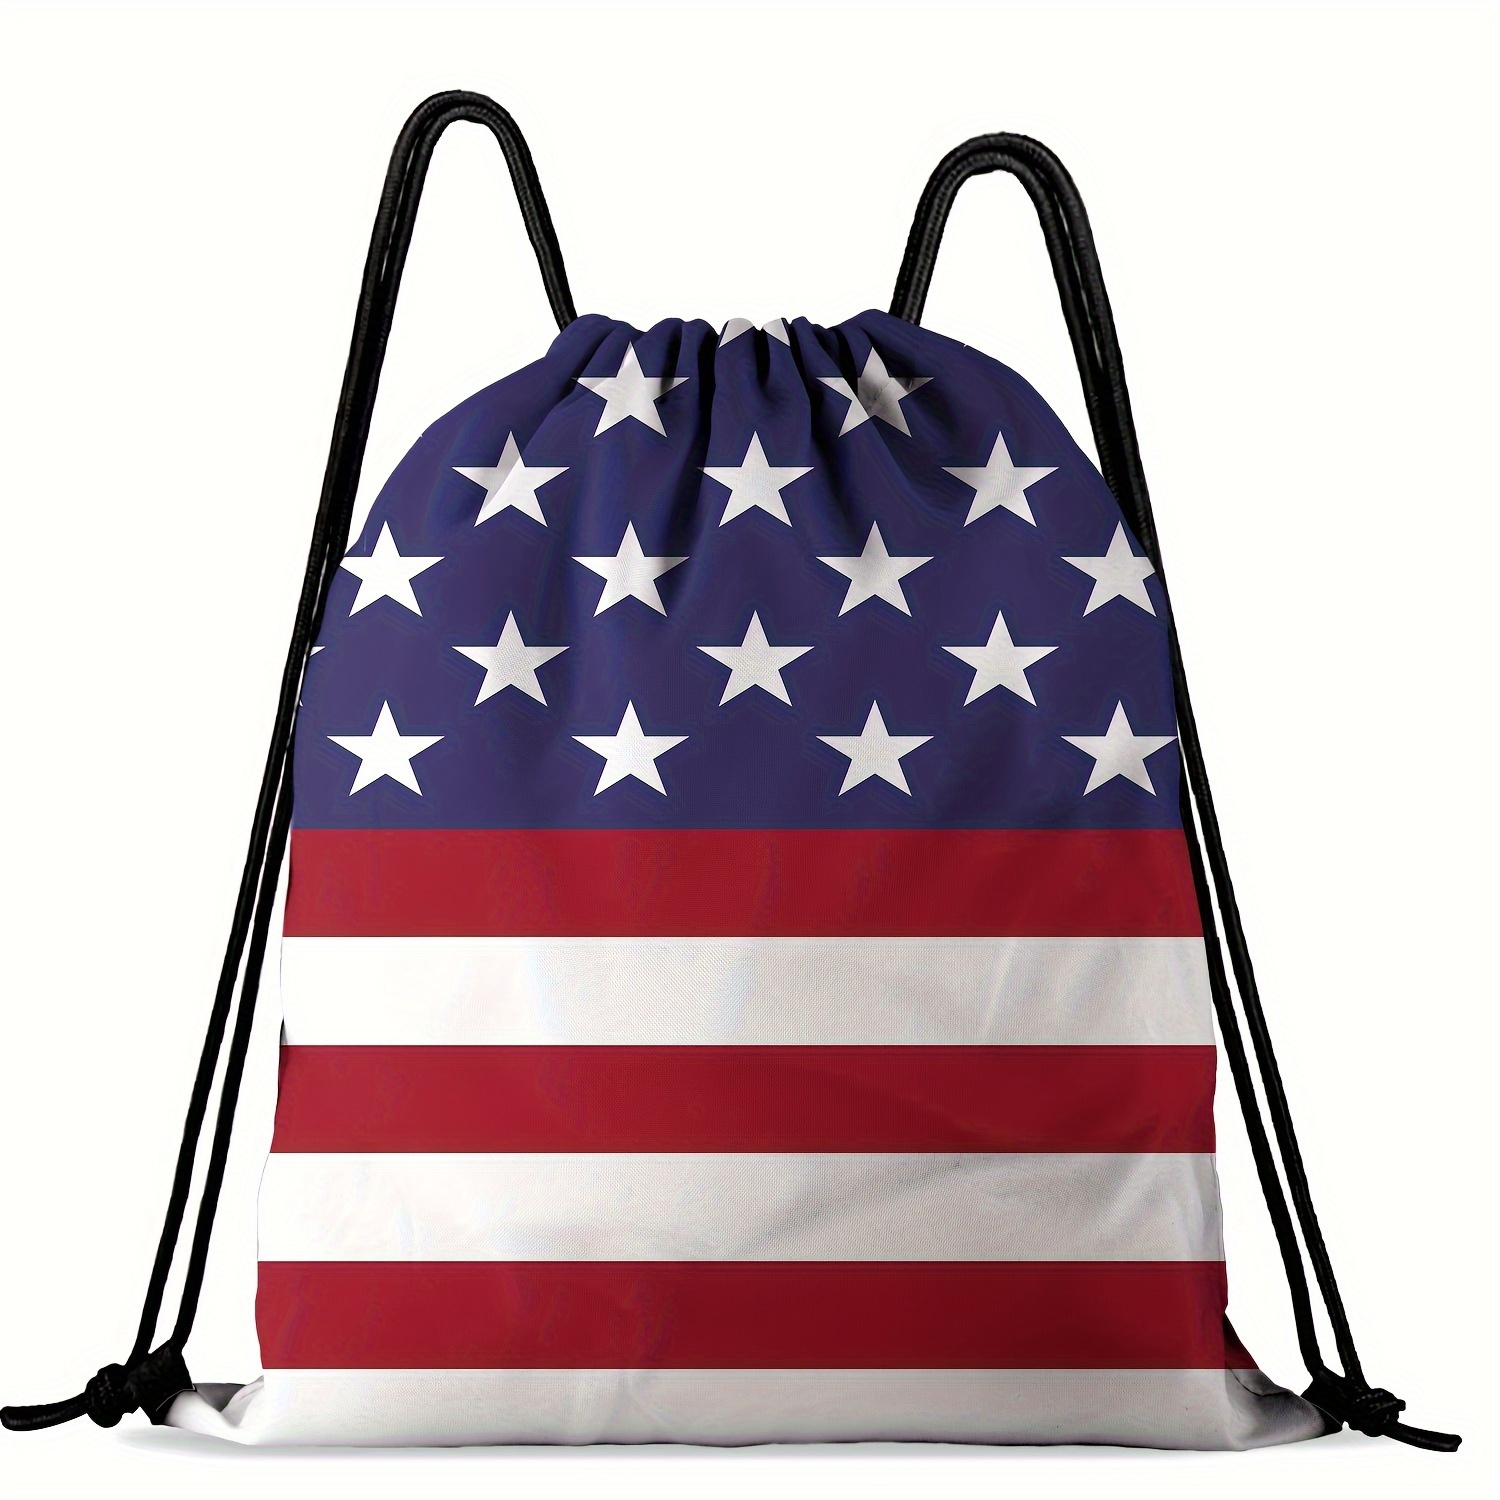 

American Flag Drawstring Bag, Large Capacity Polyester Gym Sack With Adjustable Straps, Foldable & Quick-dry, Multipurpose Casual Backpack For Various Occasions